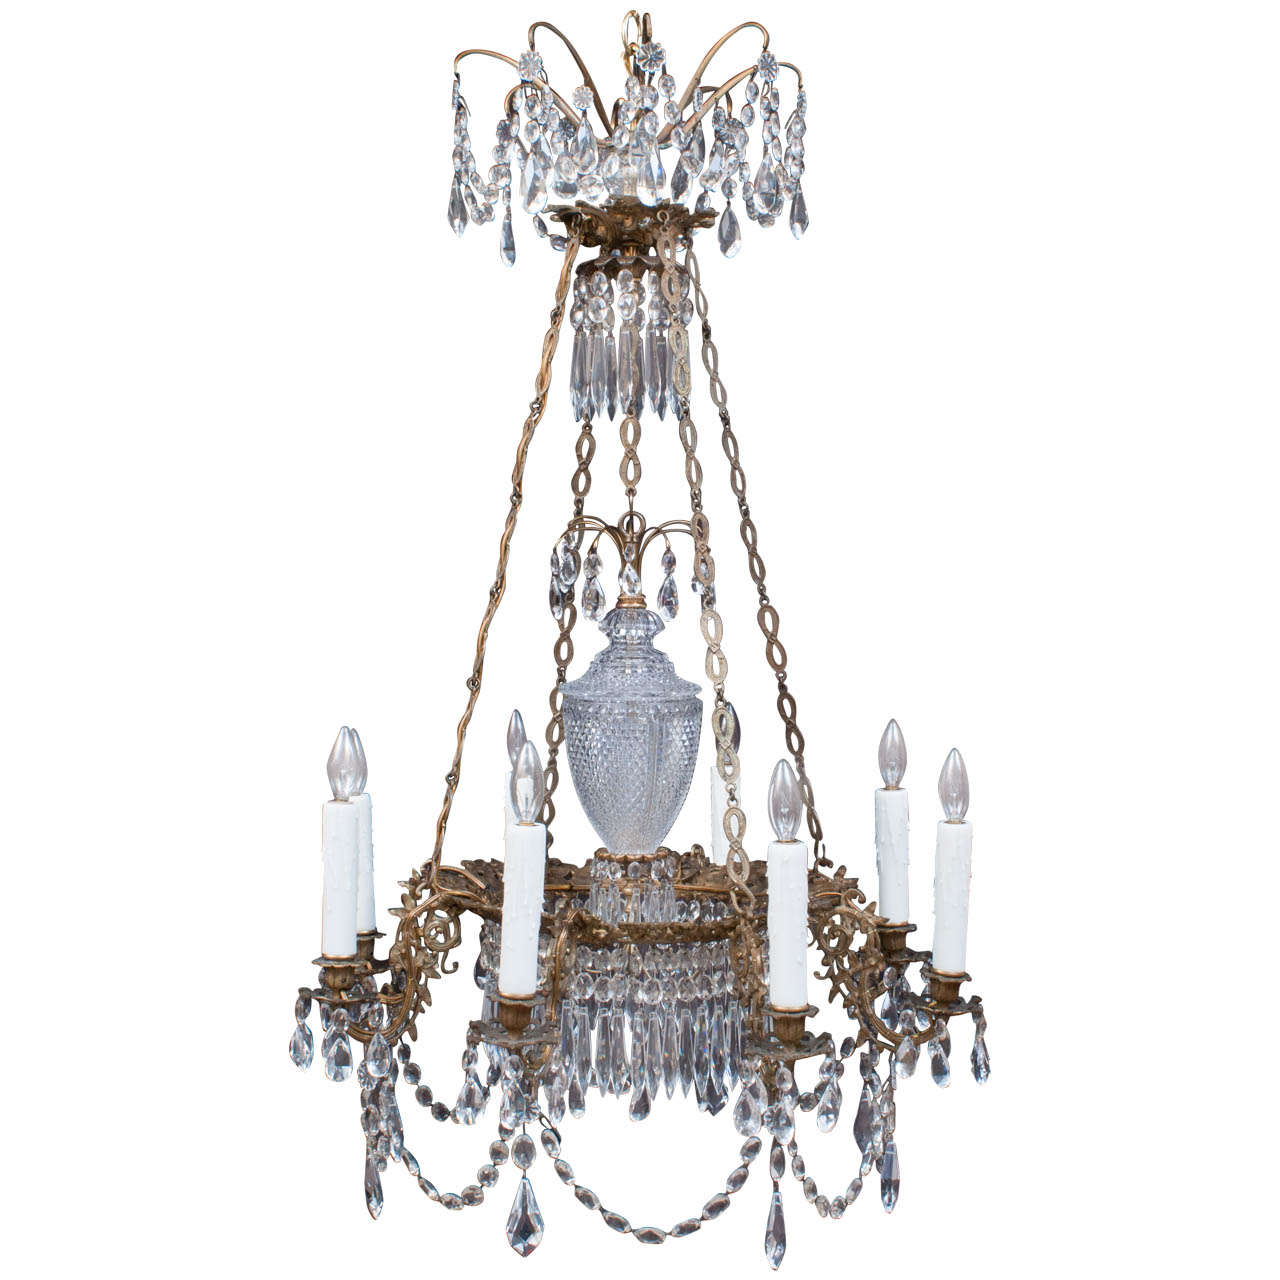 Neoclassic Eight-Light Gilt Brass and Crystal Chandelier, Sweden, Circa:1820